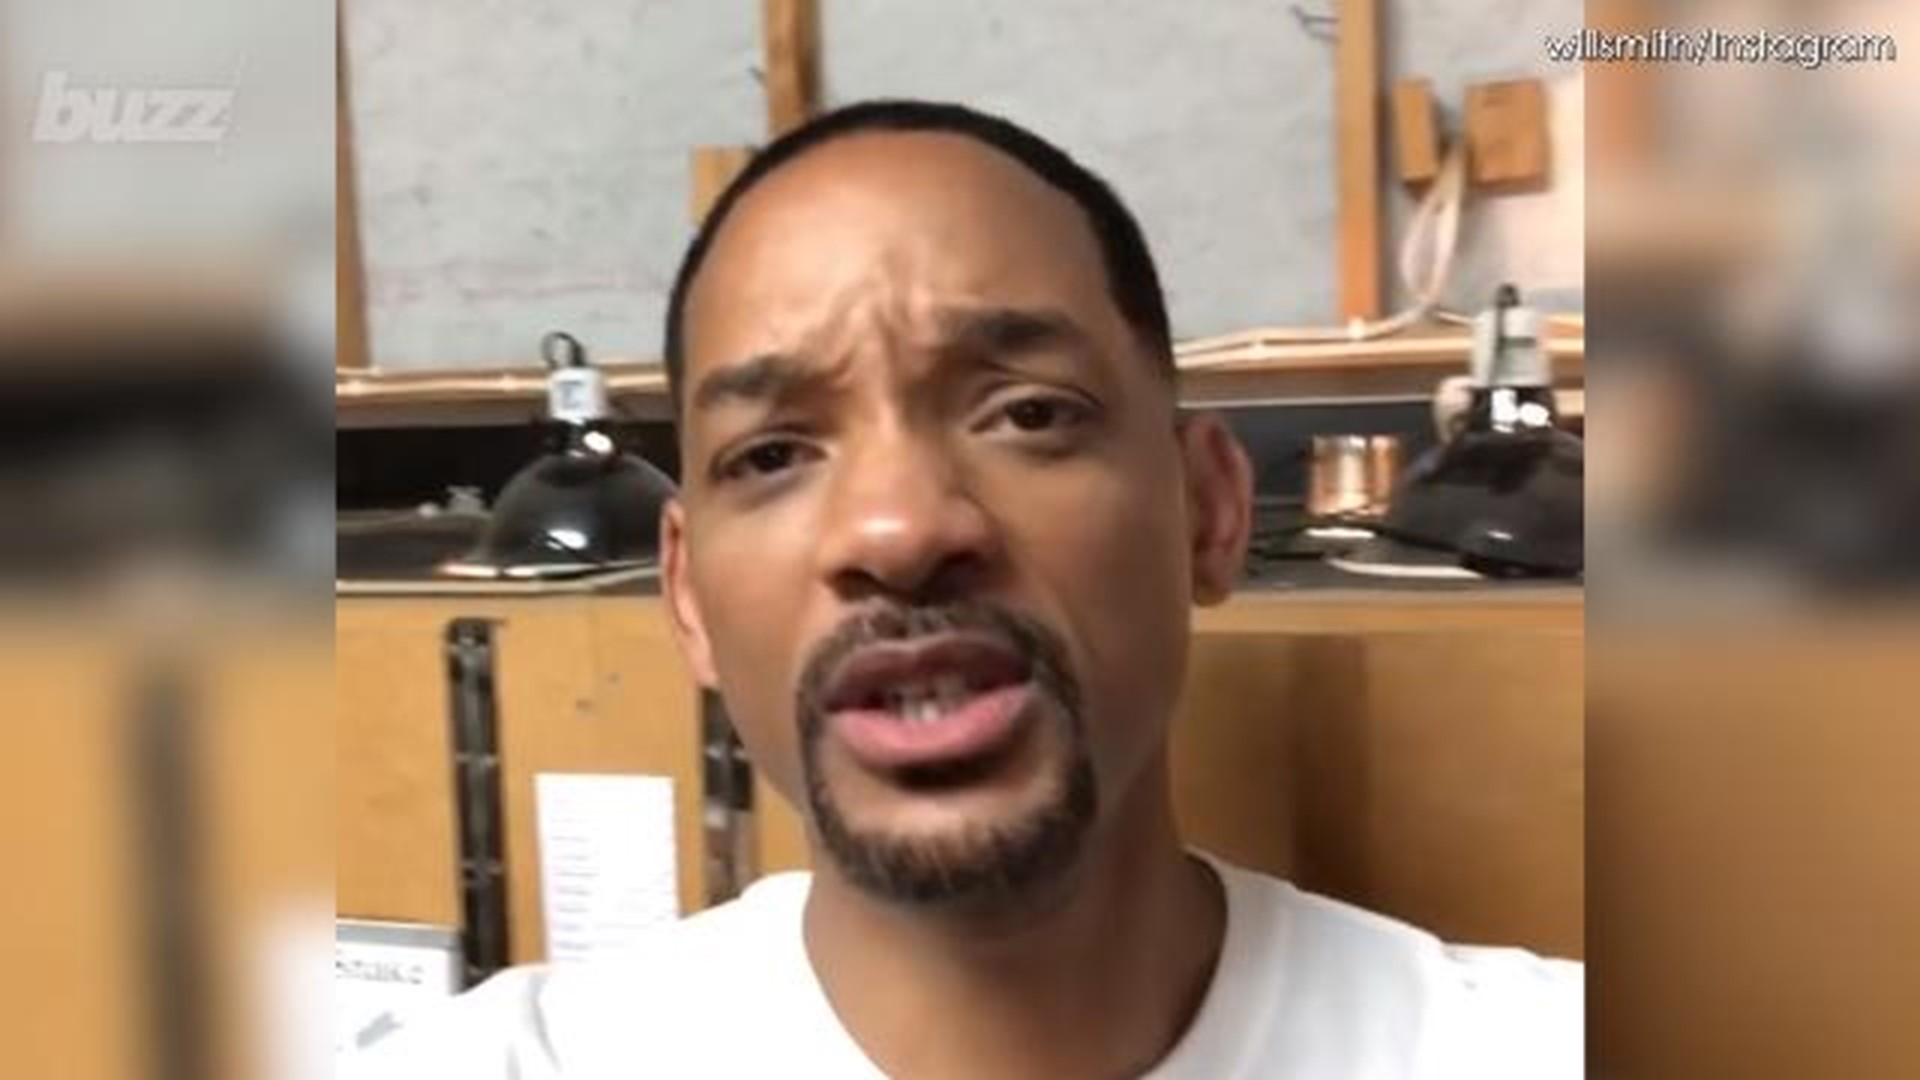 Will Smith is fairly new to Instagram, but if his videos from Australia are any indication, he already has the hang of it. Keri Lumm (@thekerilumm) shares the hilarious images.